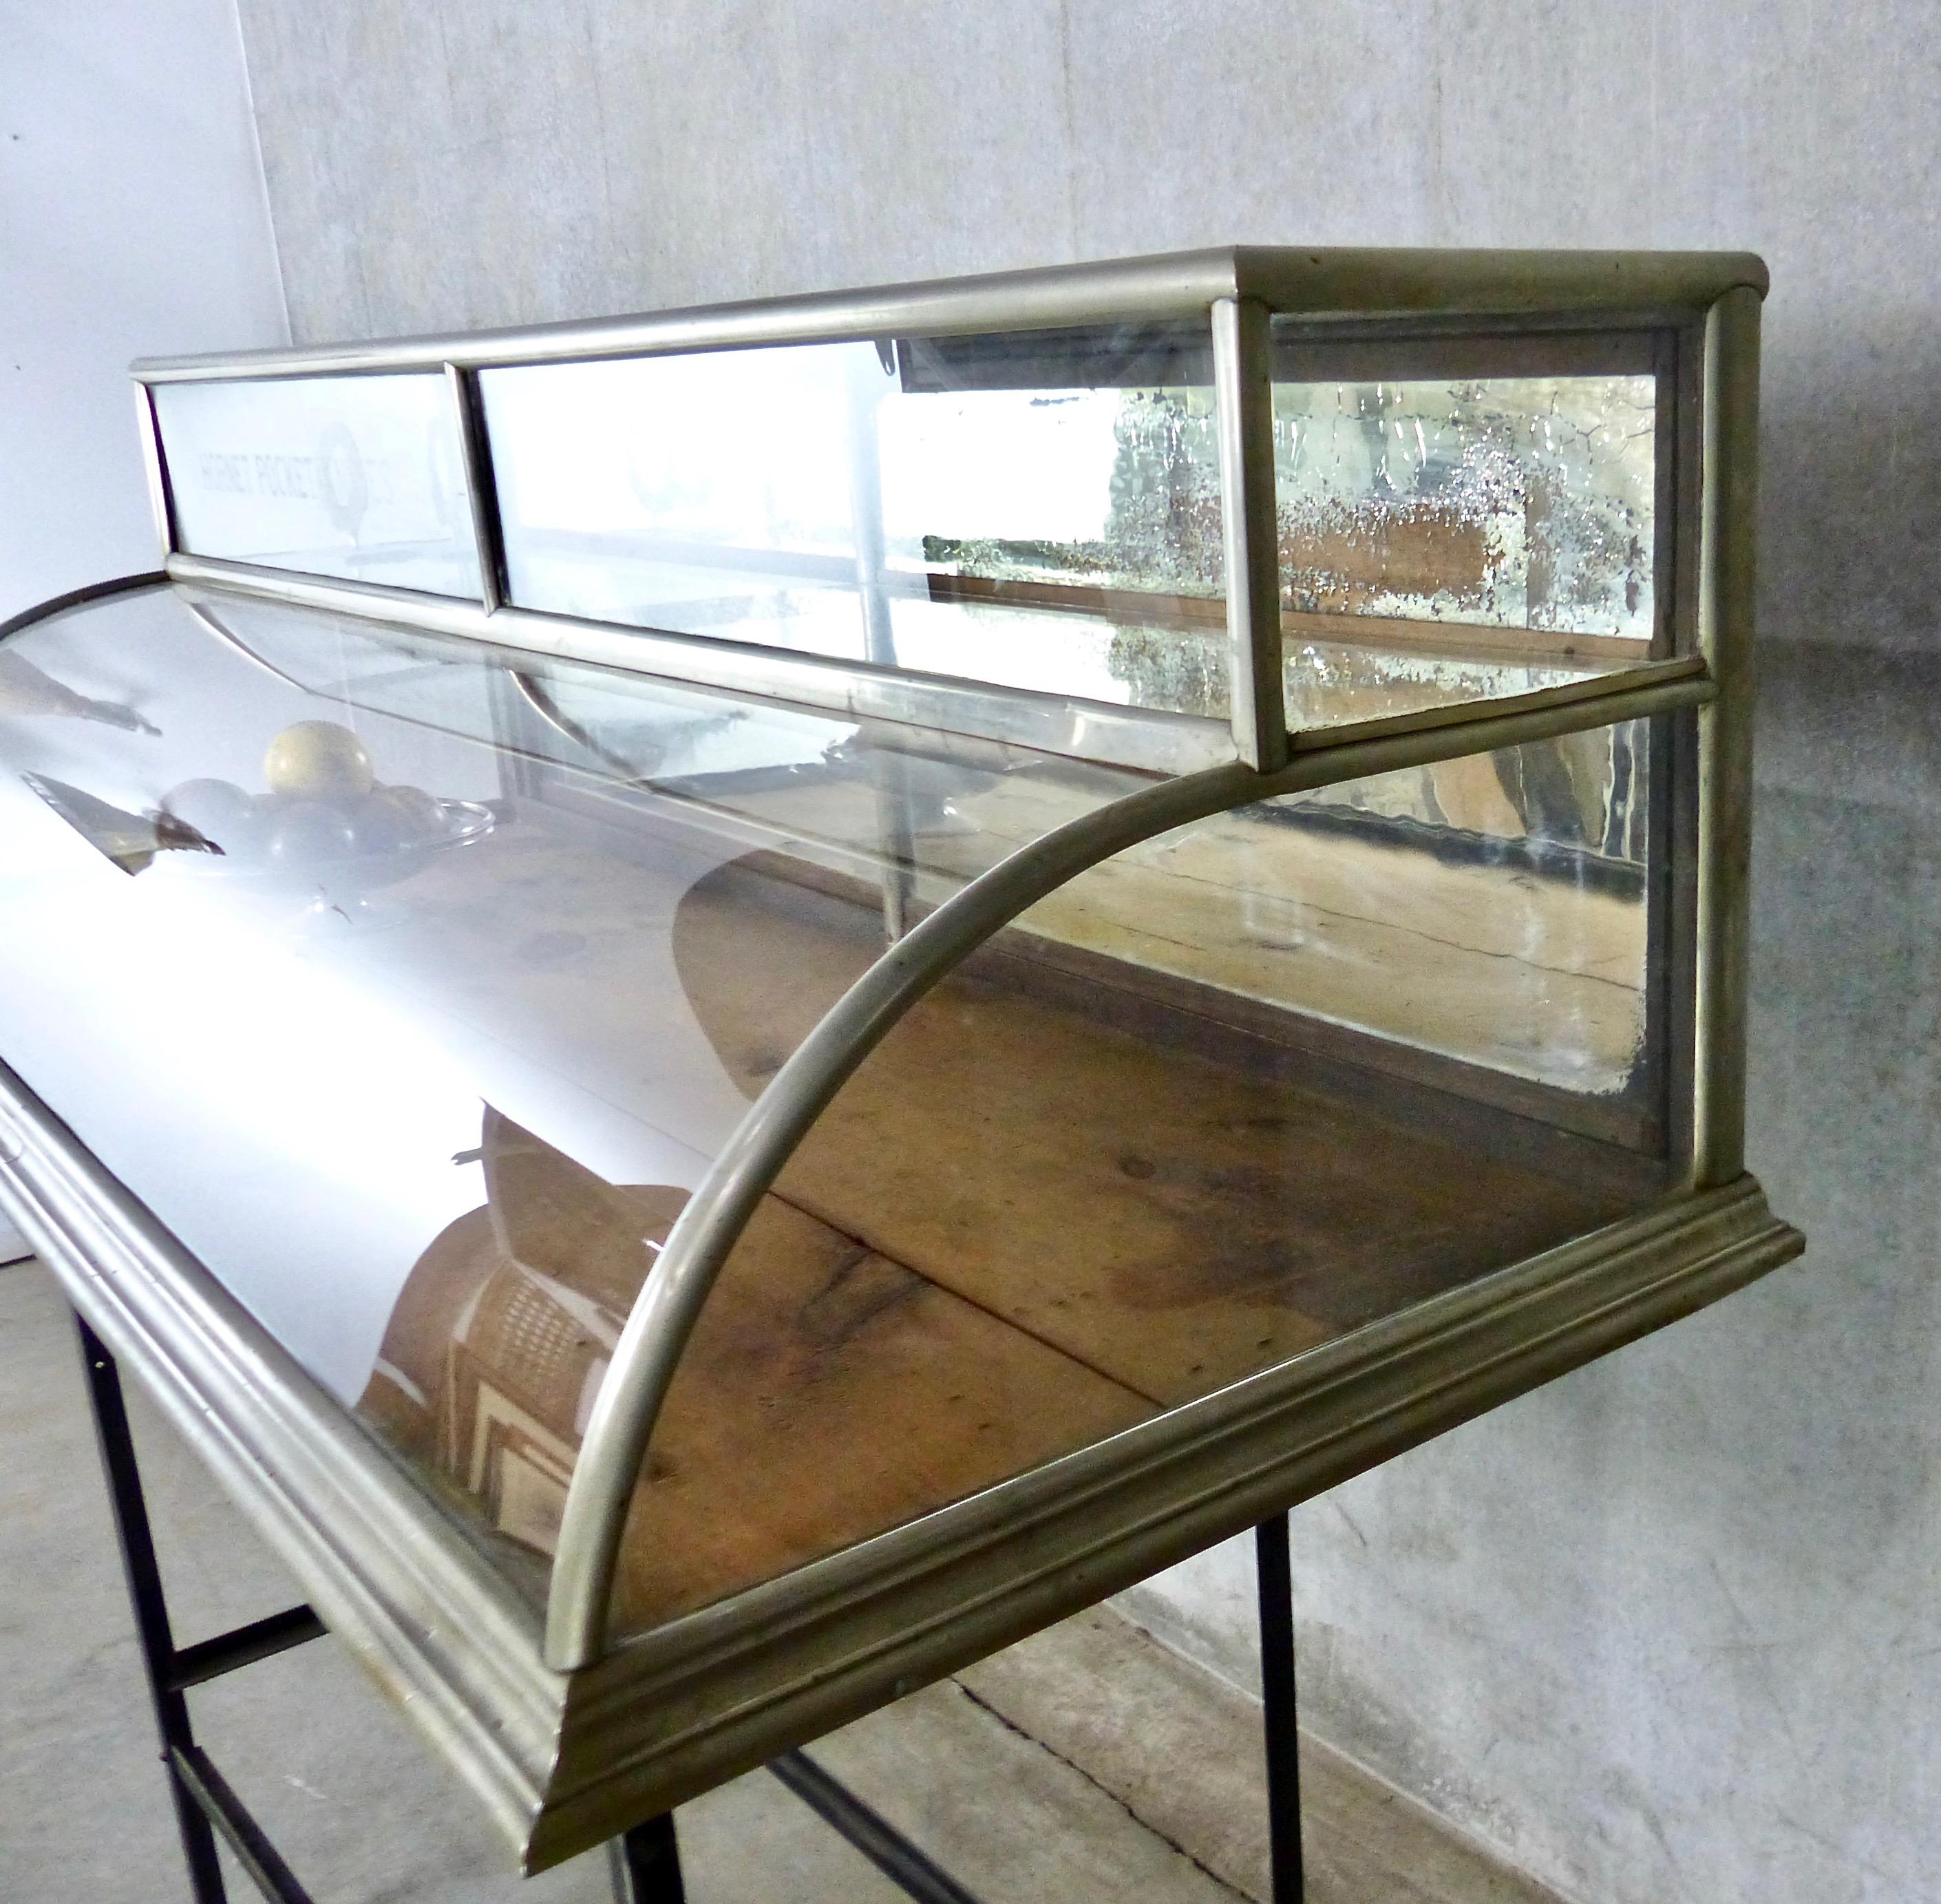 A rare and unusual curved-glass countertop display case that has an additional upper enclosed shelf. Originally made to display hornet pocket knives, it features mirrored sliding doors in the rear. Very rare form.
Made by A. Lange maker